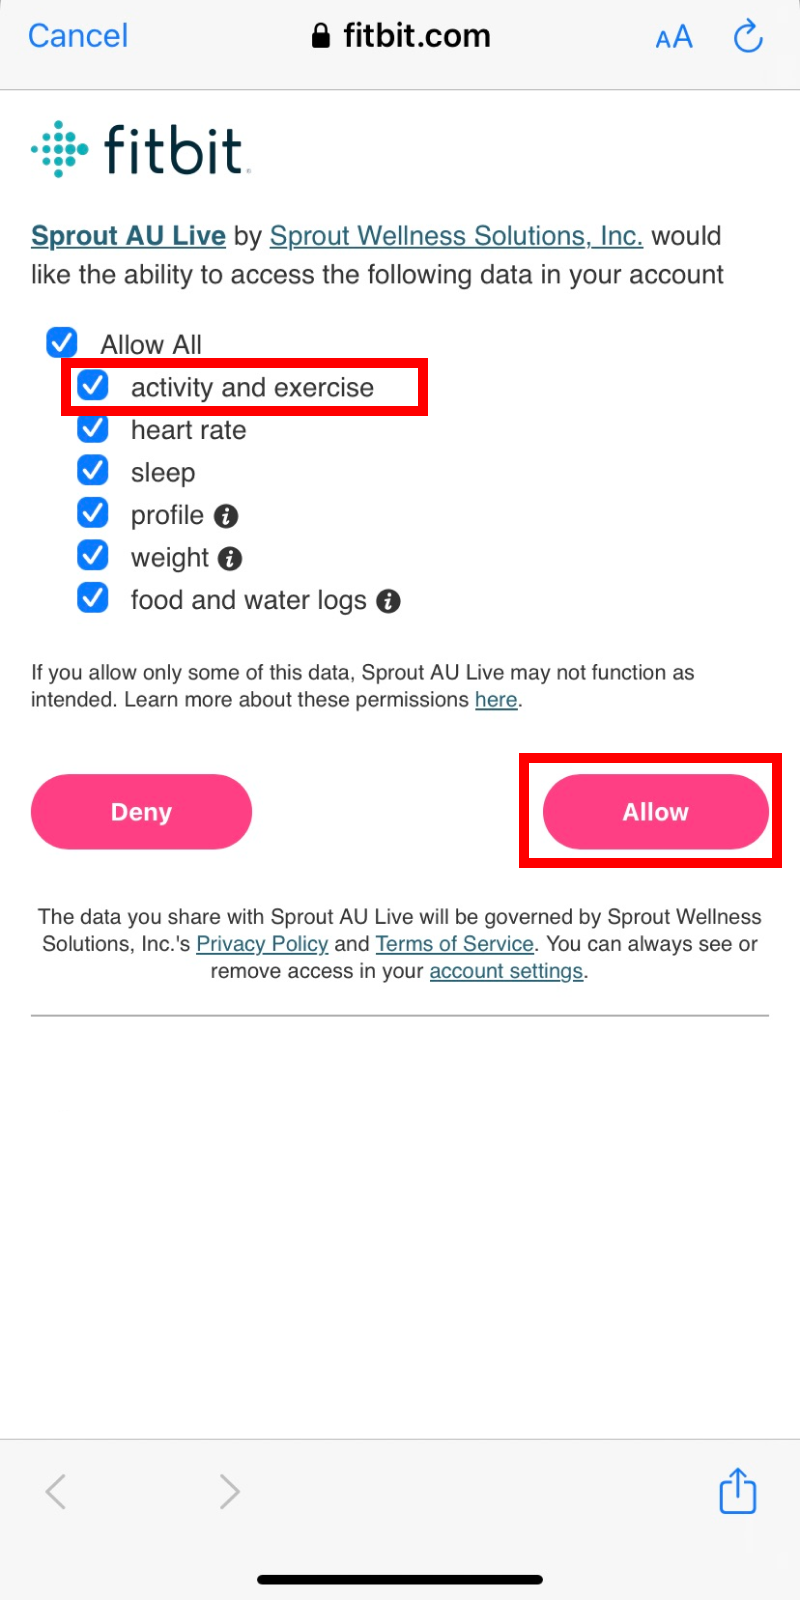 Image showing the activity and exercise checkbox is ticked in fitbit.com and the allow button has been selected